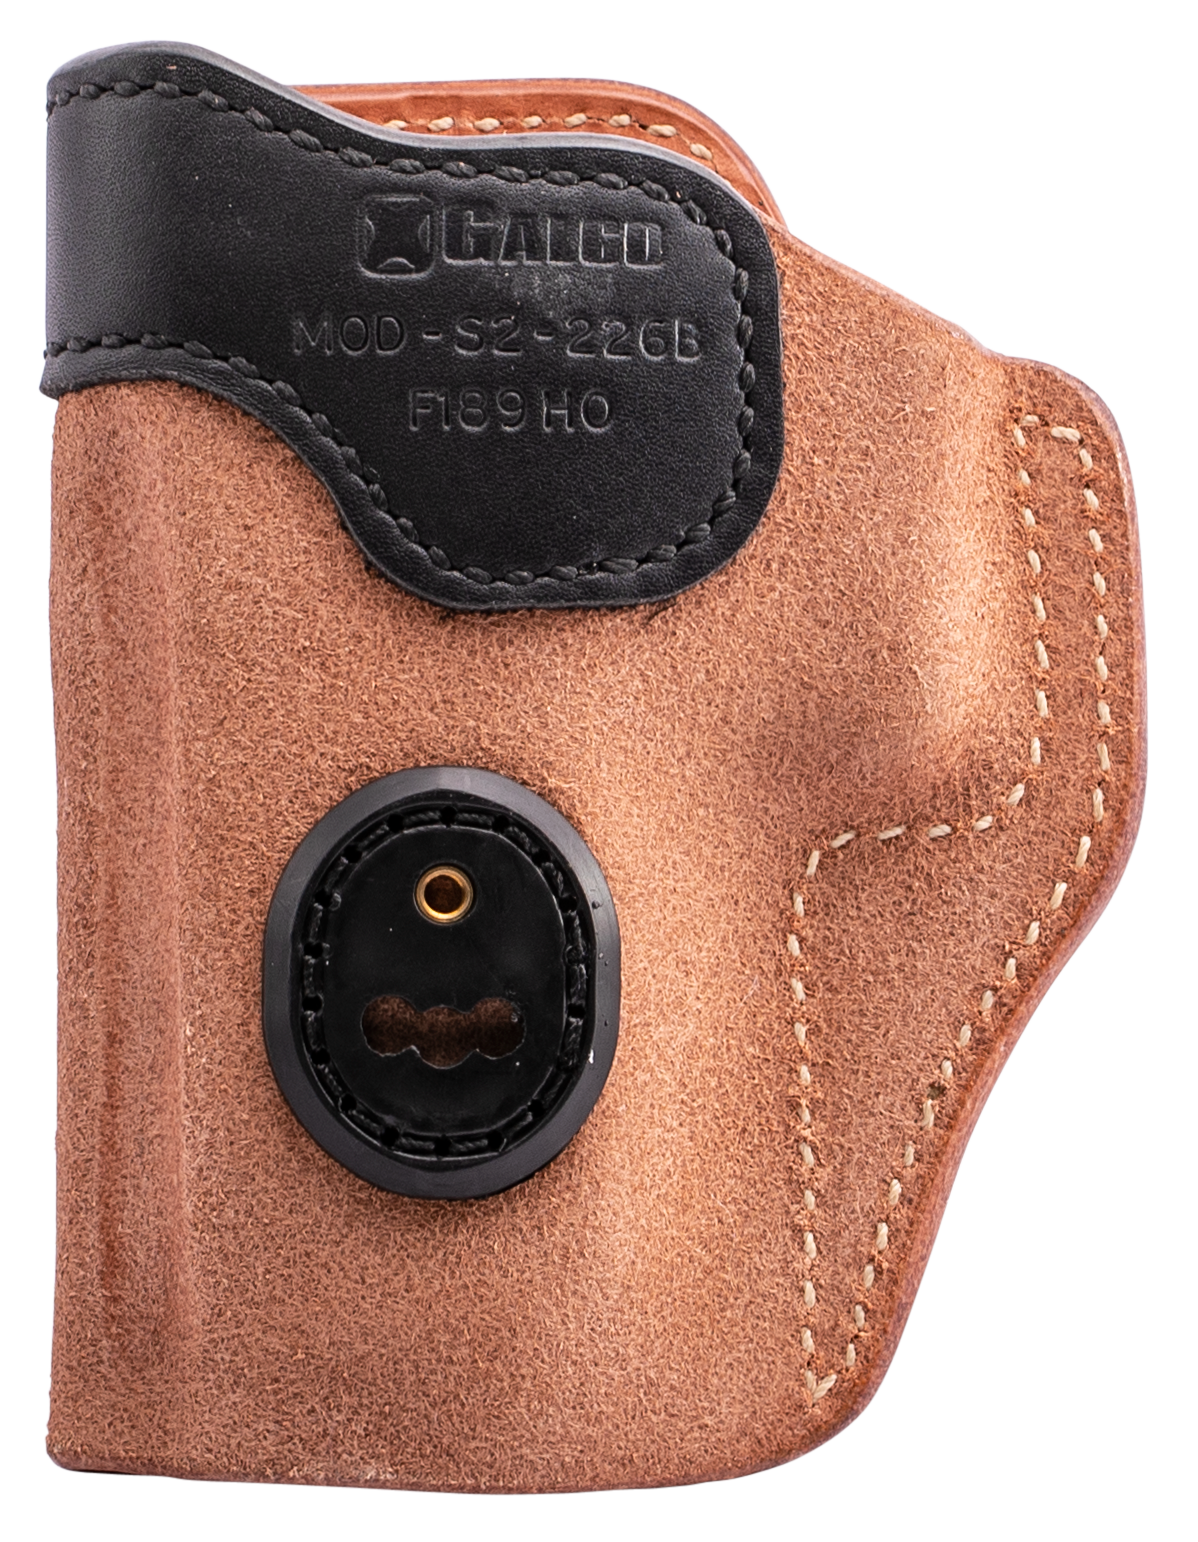 Galco Scout 3.0 IWB Holster - GLOCK 19